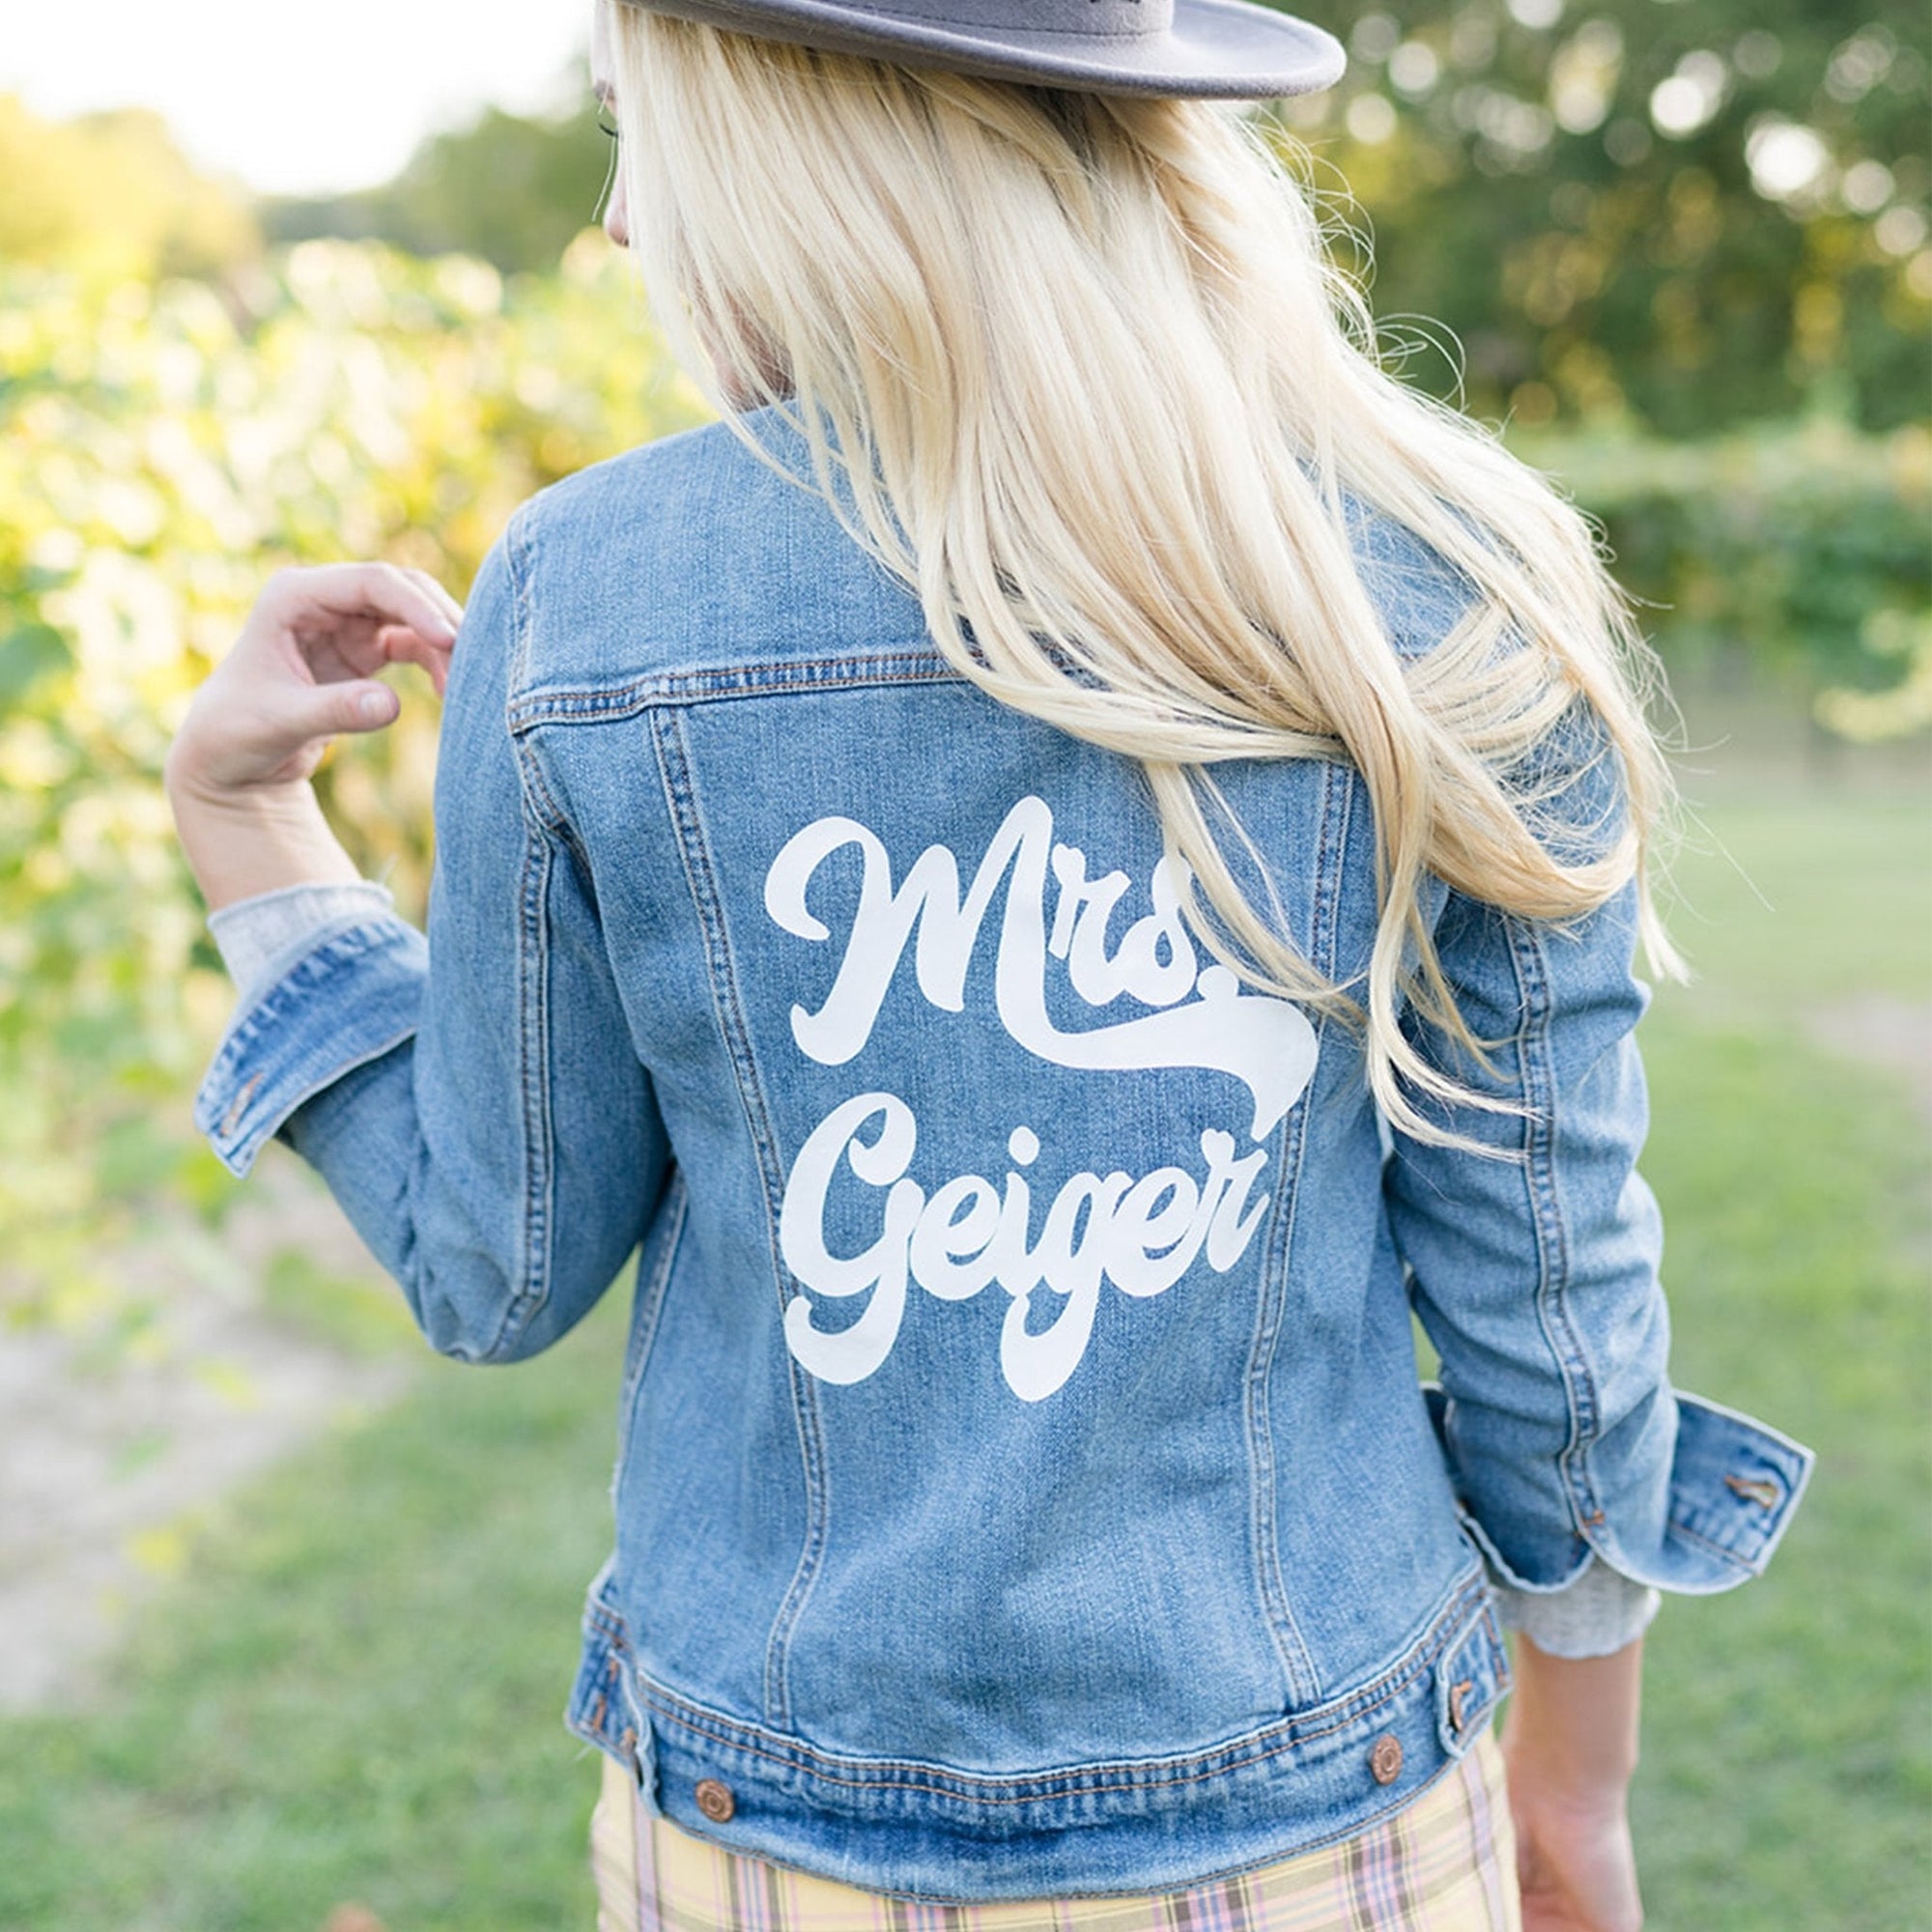 Personalized Jean Jackets - Sprinkled With Pink